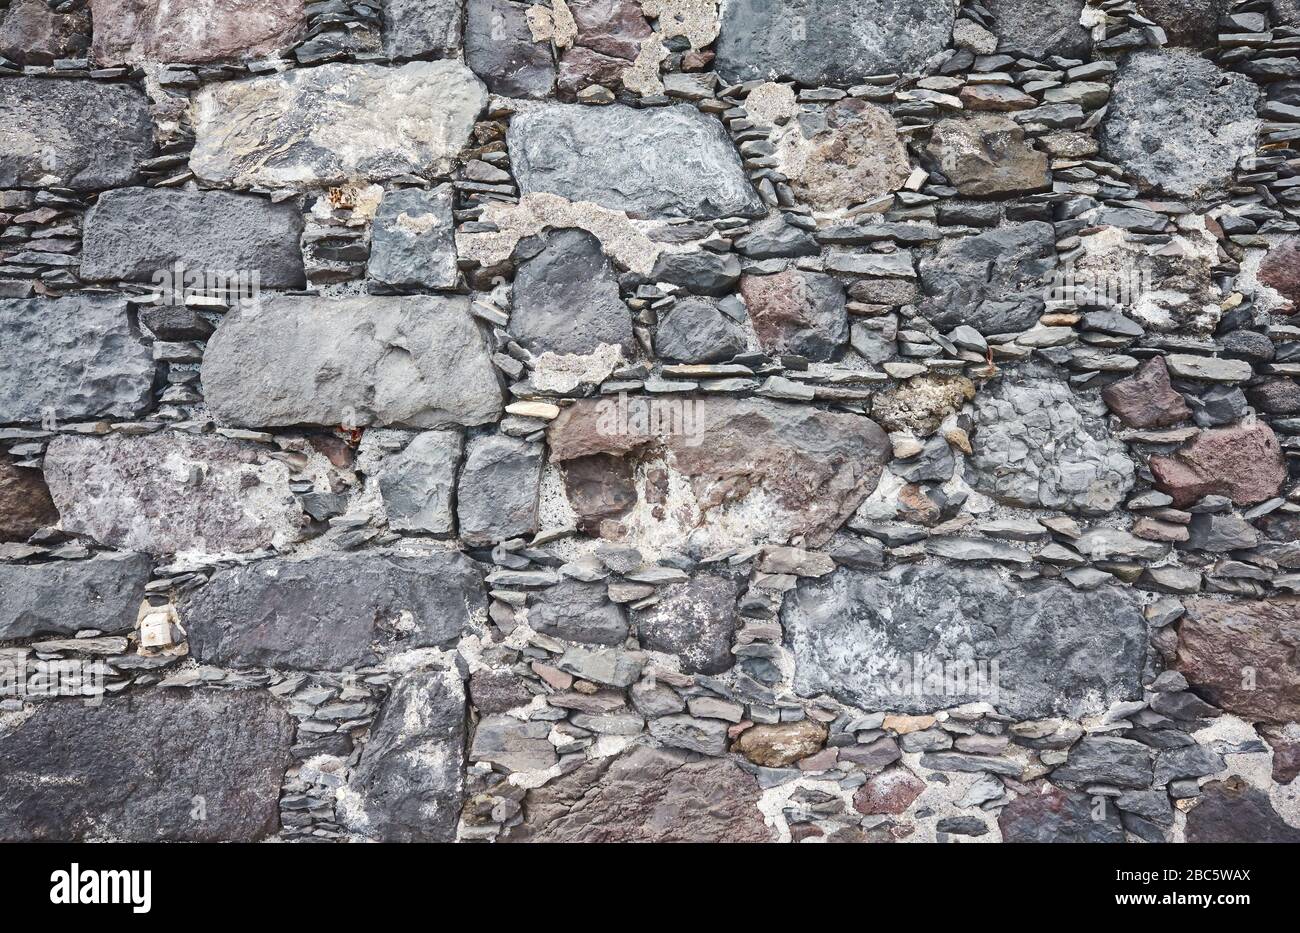 Uneven real stone wall background or texture. Stock Photo